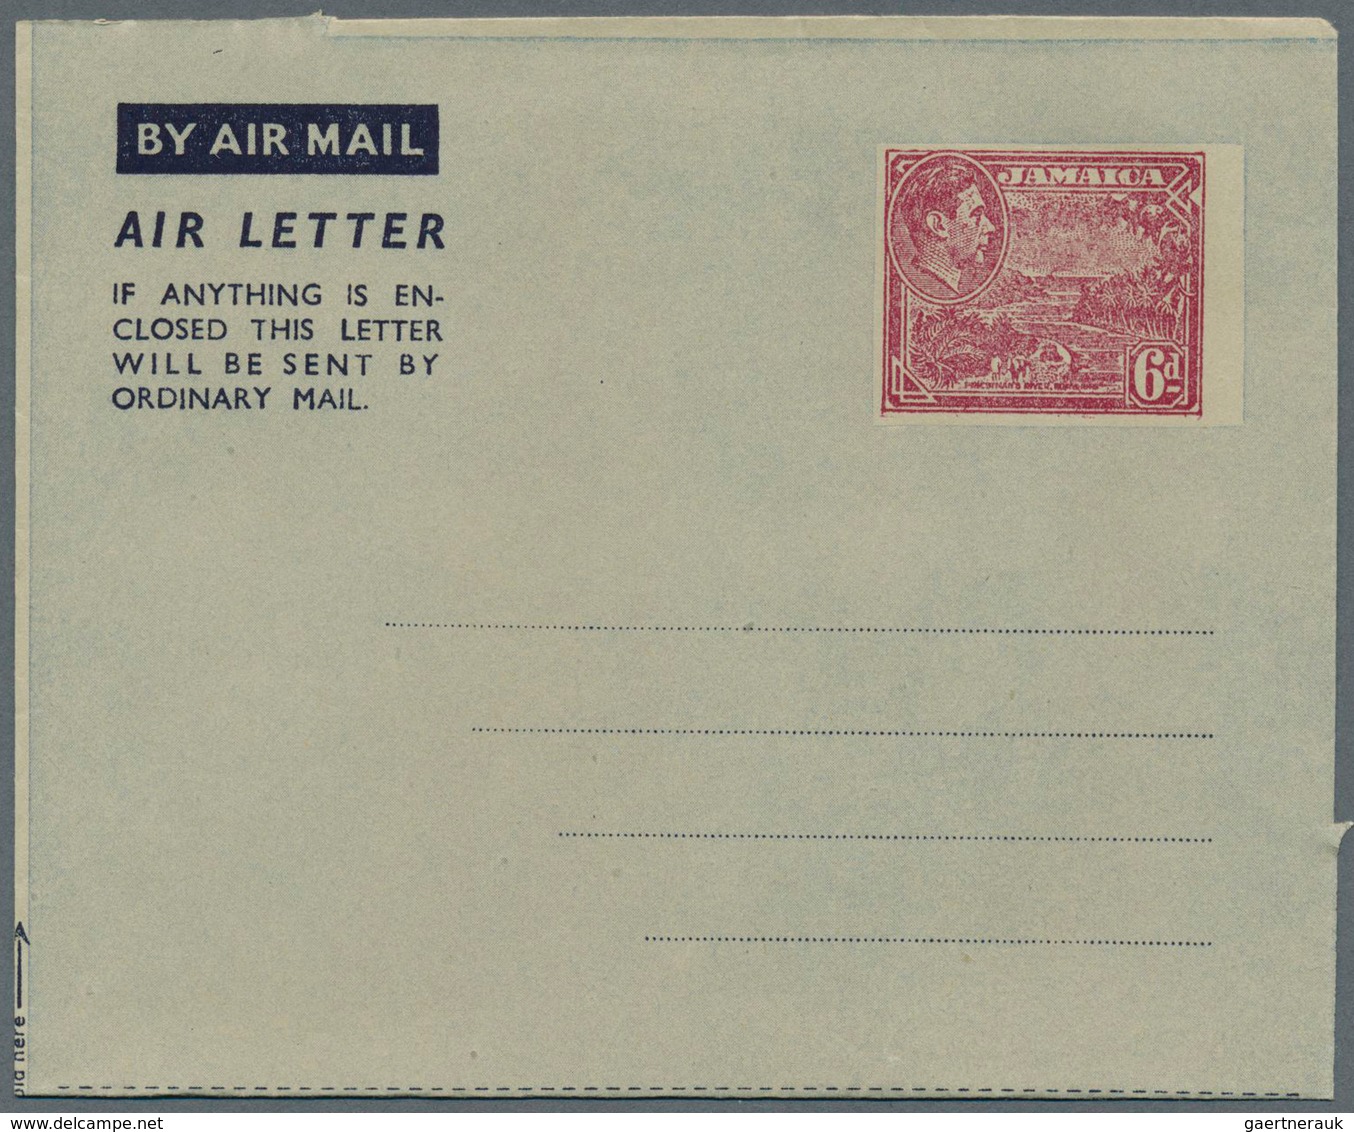 Jamaica: 1947/1983 (ca.), AEROGRAMMES: accumulation with approx. 1.000 unused and used/CTO airletter